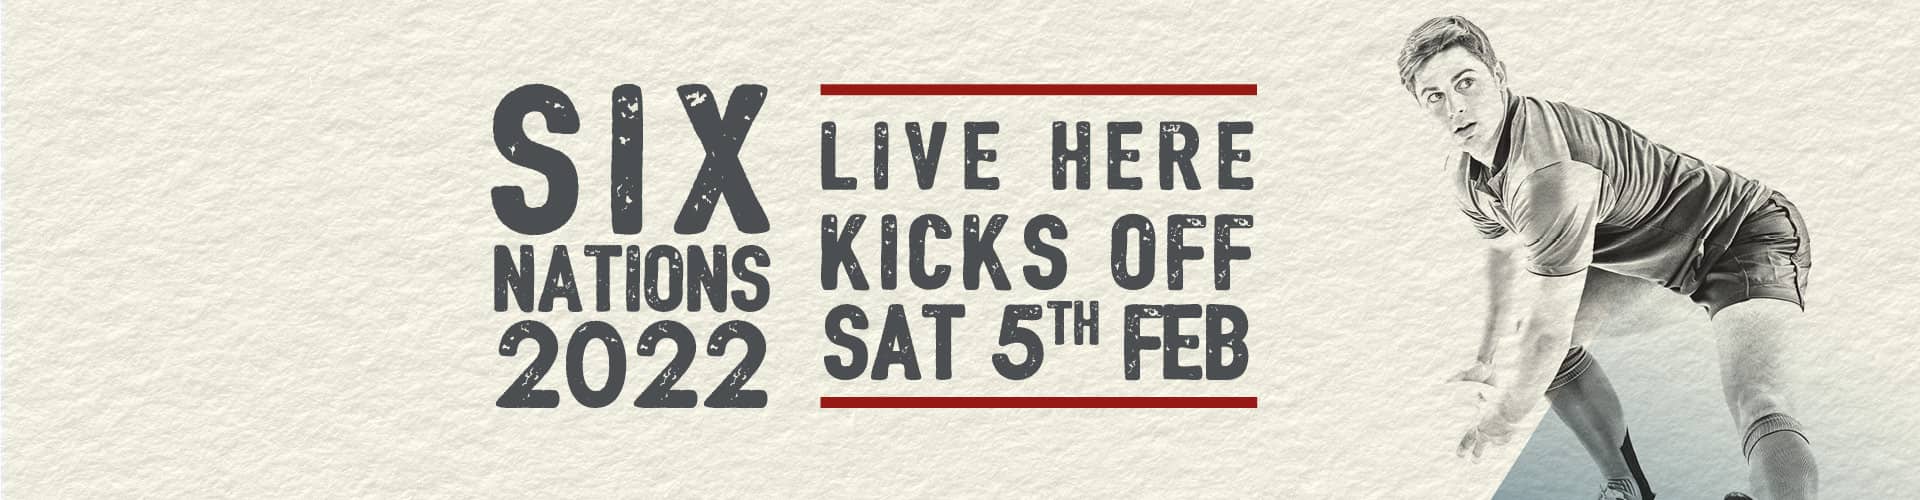 Watch the Six Nations live at The Green Man